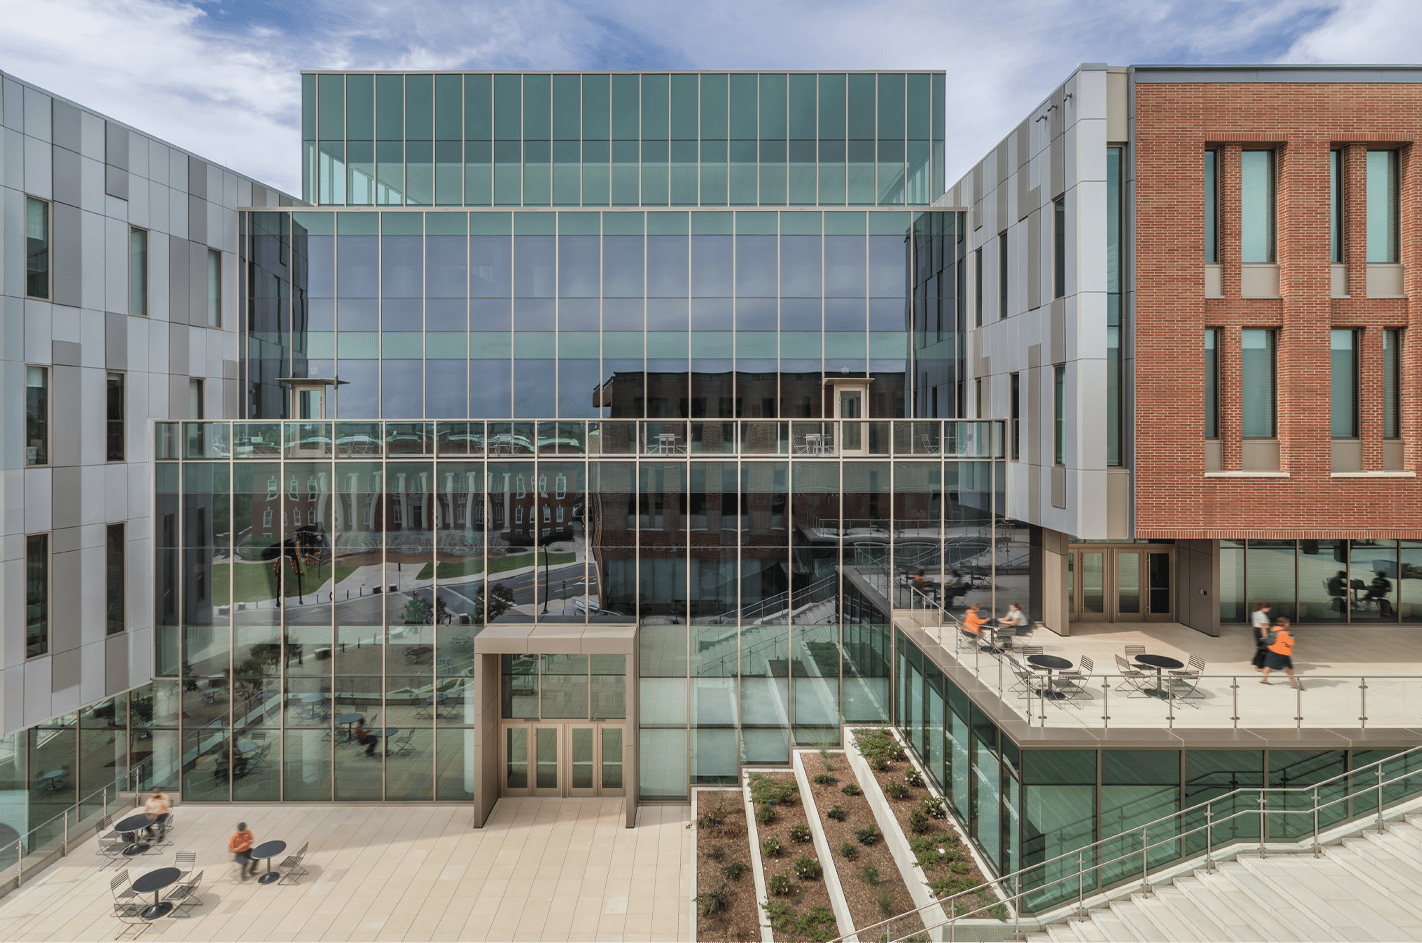 Exterior of a soaring 5-story atrium on a modern university campus